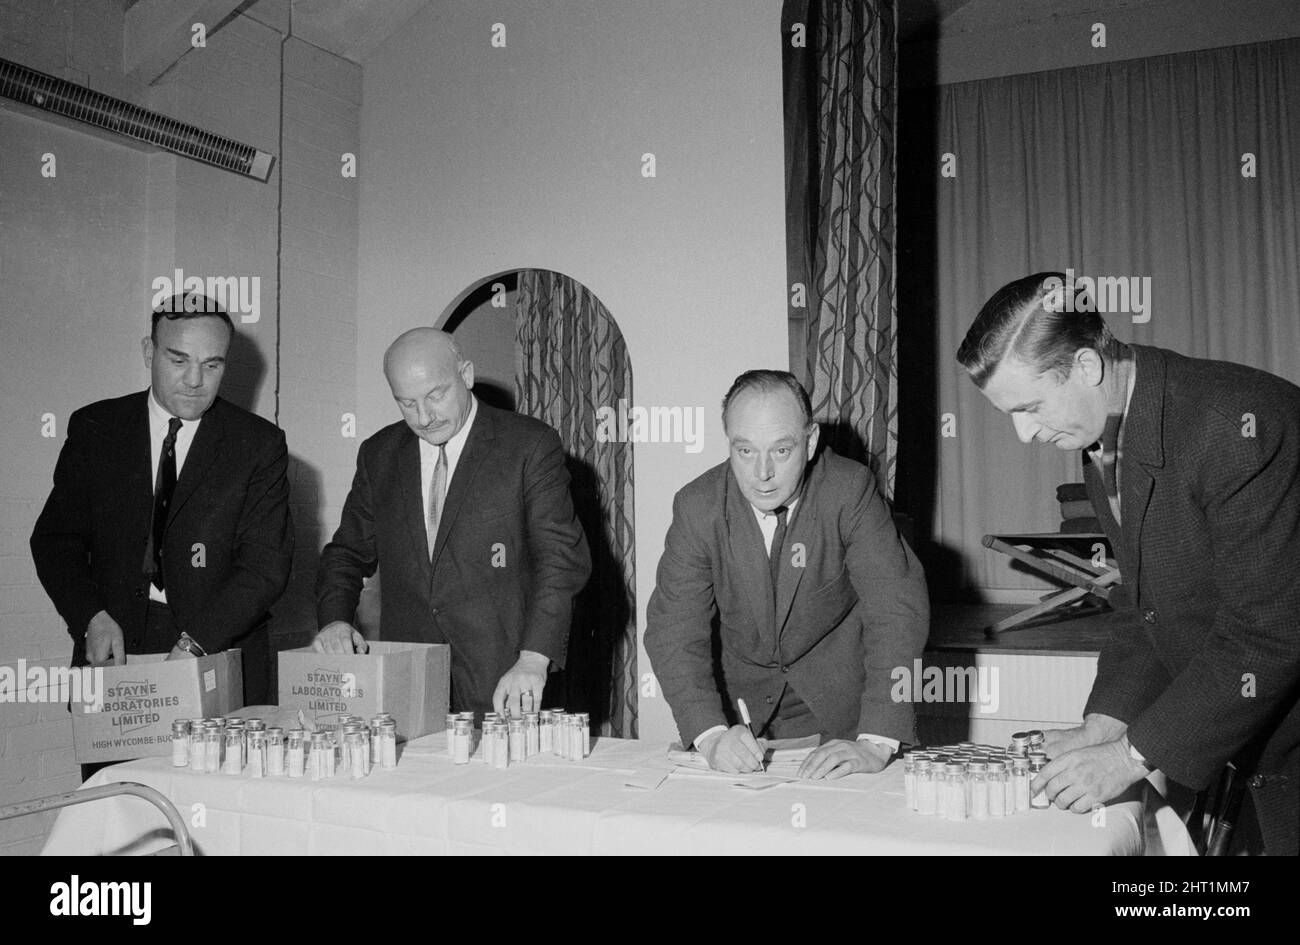 Blood samples being checked by detectives at Beenham Village Hall in the hunt for the killer of Yolande Waddington. They are left to right: Sergeant Boff, Superindent Wallis Virgo of the Murder Squad, Detective Superintendant Lawson of Berkshire CID and an unidentified detective. 23rd November 1966. Stock Photo